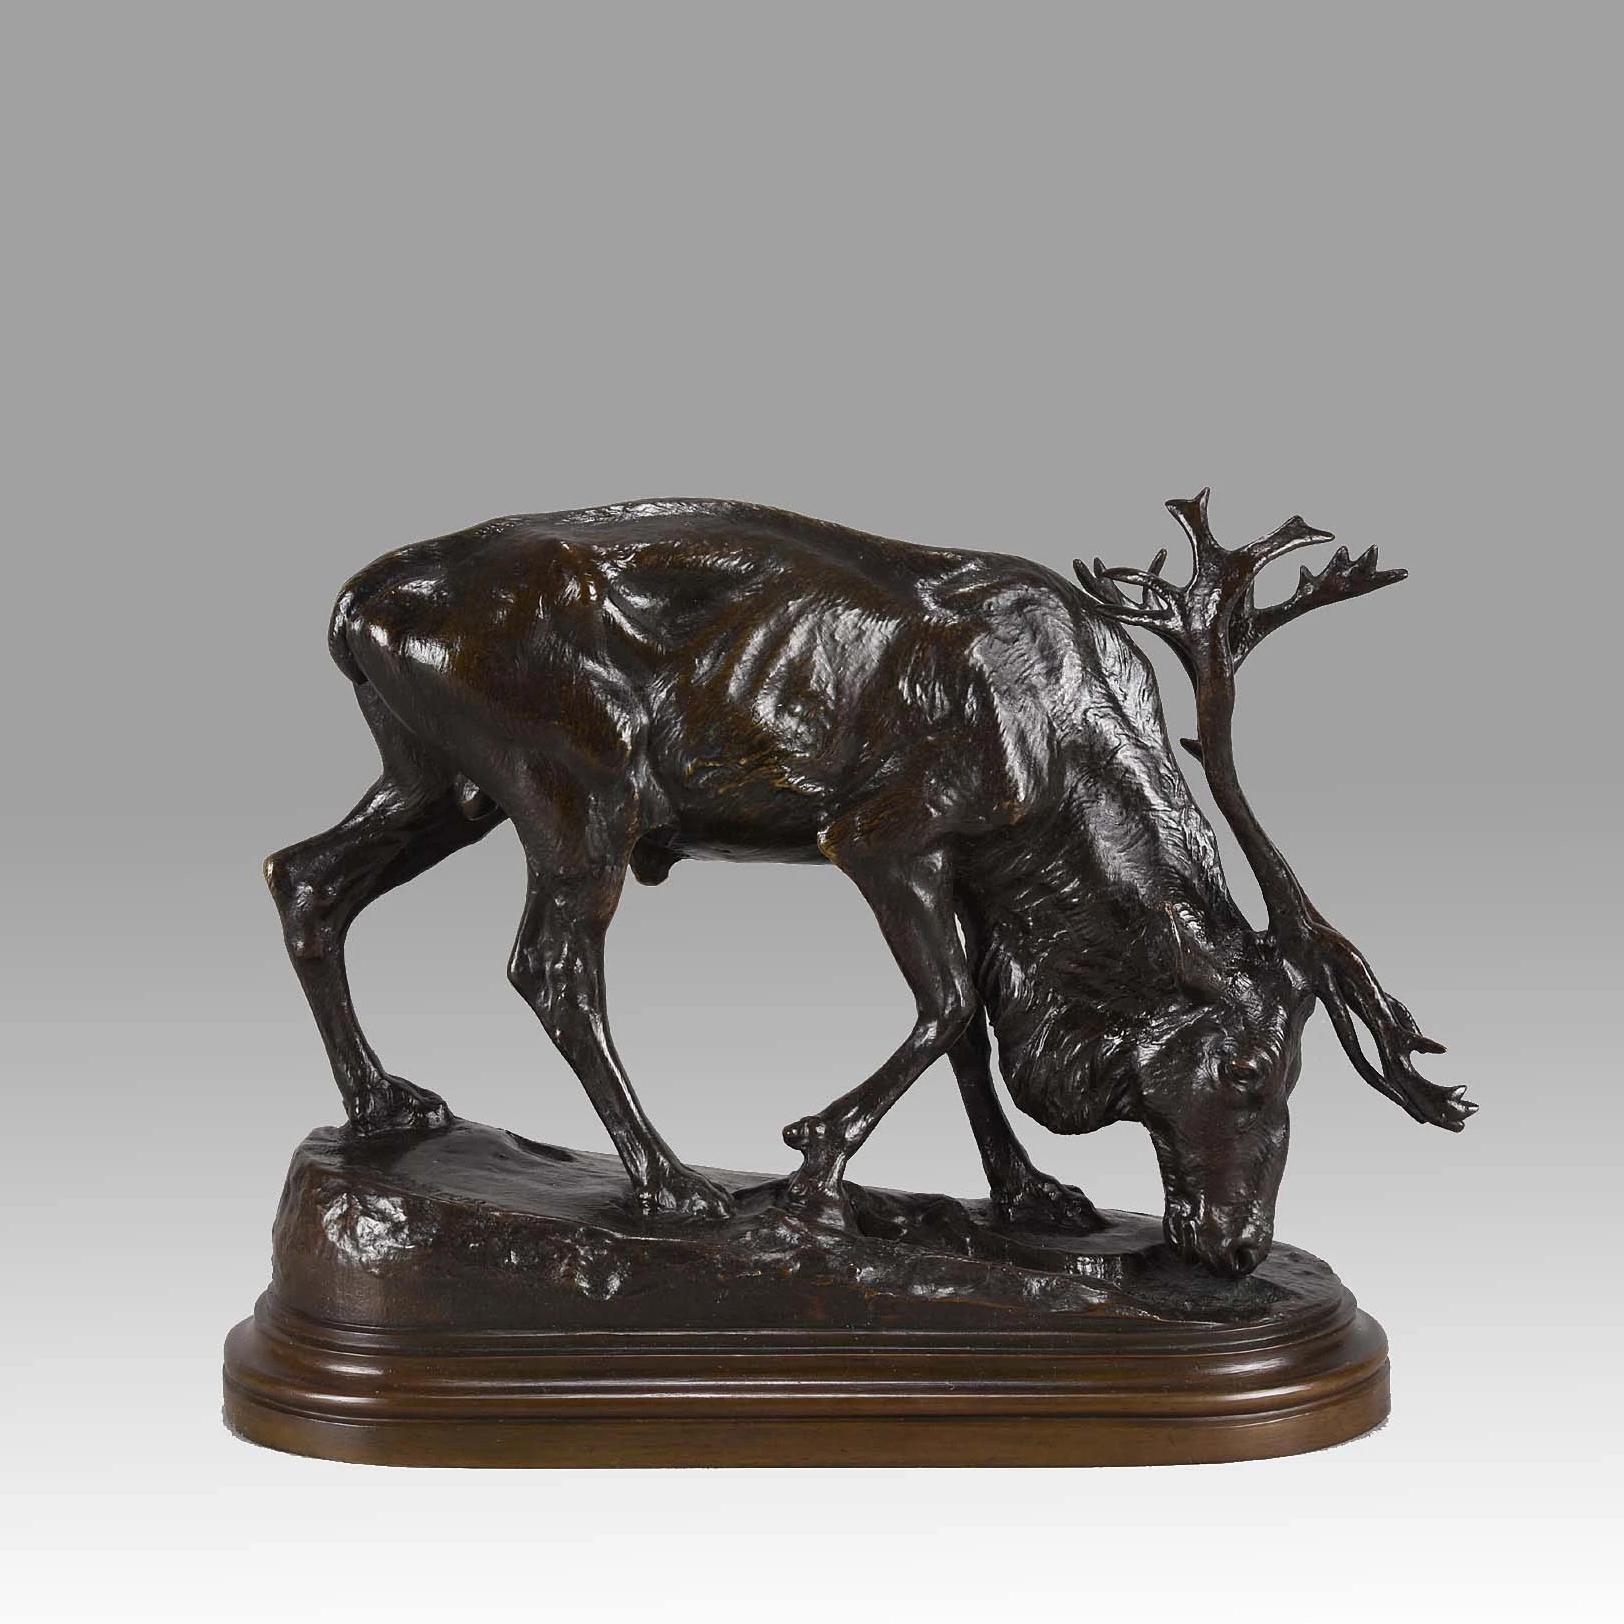 Excellent late 19th century animalier bronze study of a feeding reindeer with rich brown colour and very fine hand chased and etched surface detail, raised on a stepped naturalistic base, stamped with Peyrol Foundry mark and signed Isidore